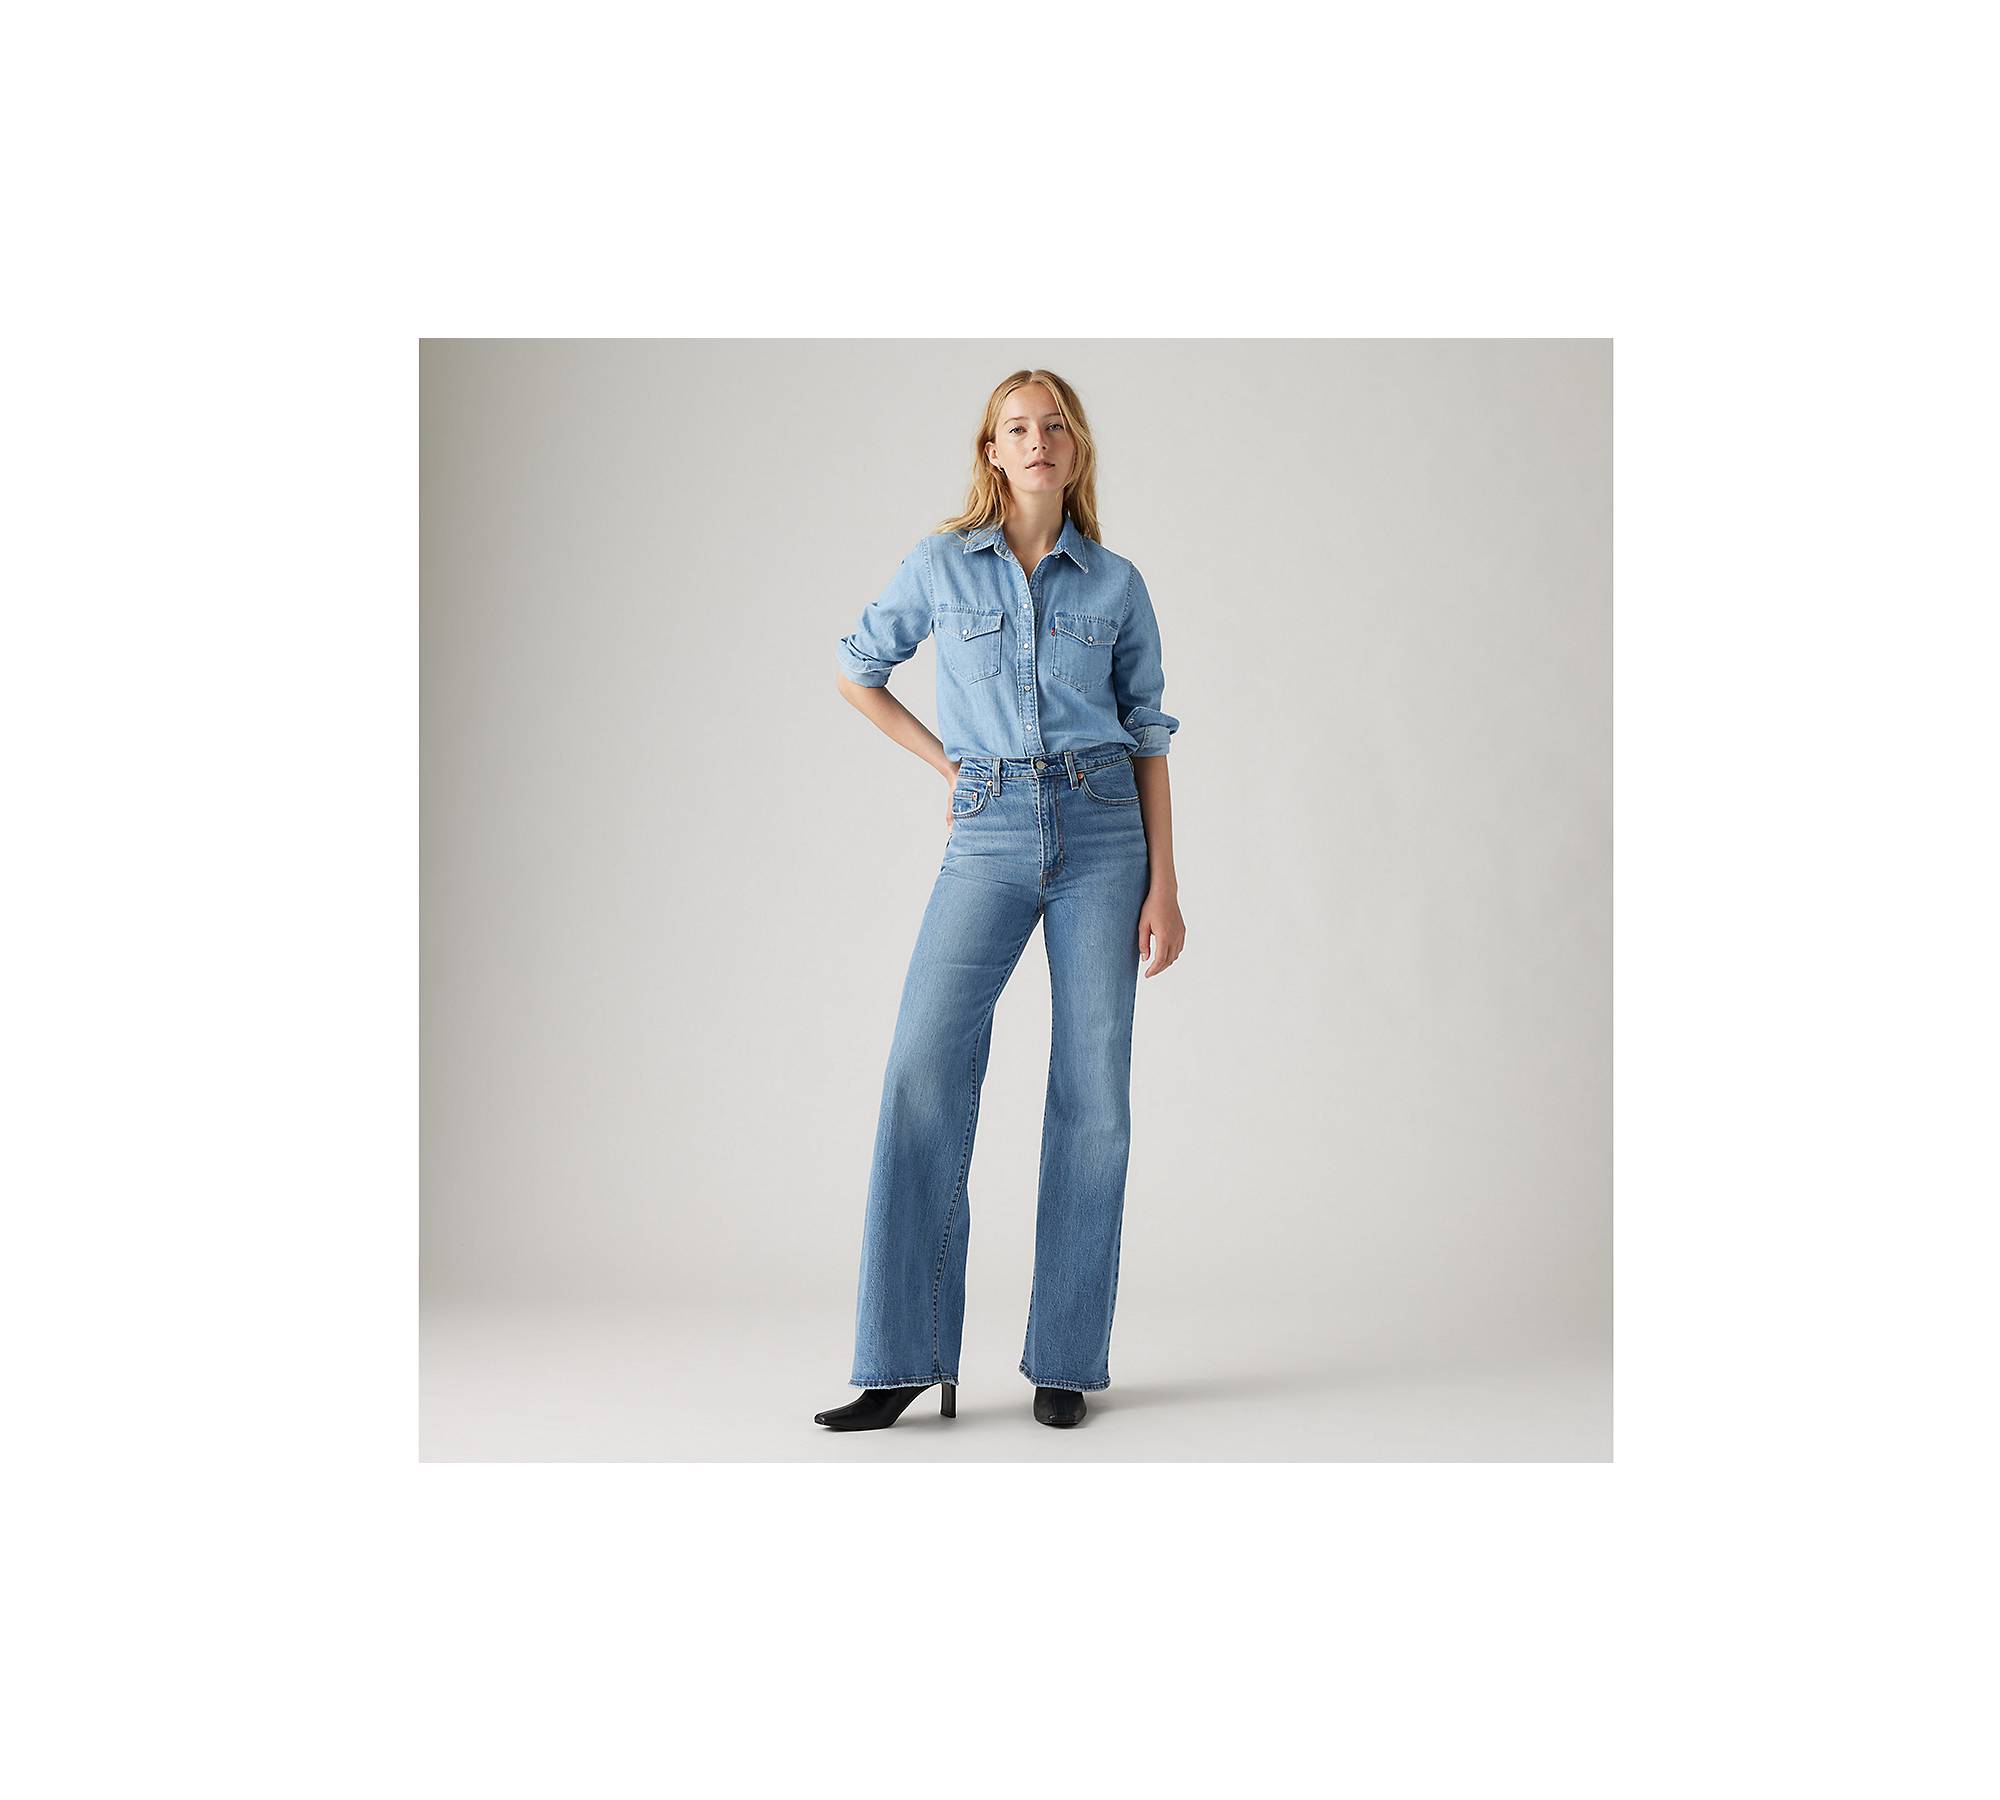 Levi's Flared & Bell-Bottom Pants for Women - Shop on FARFETCH